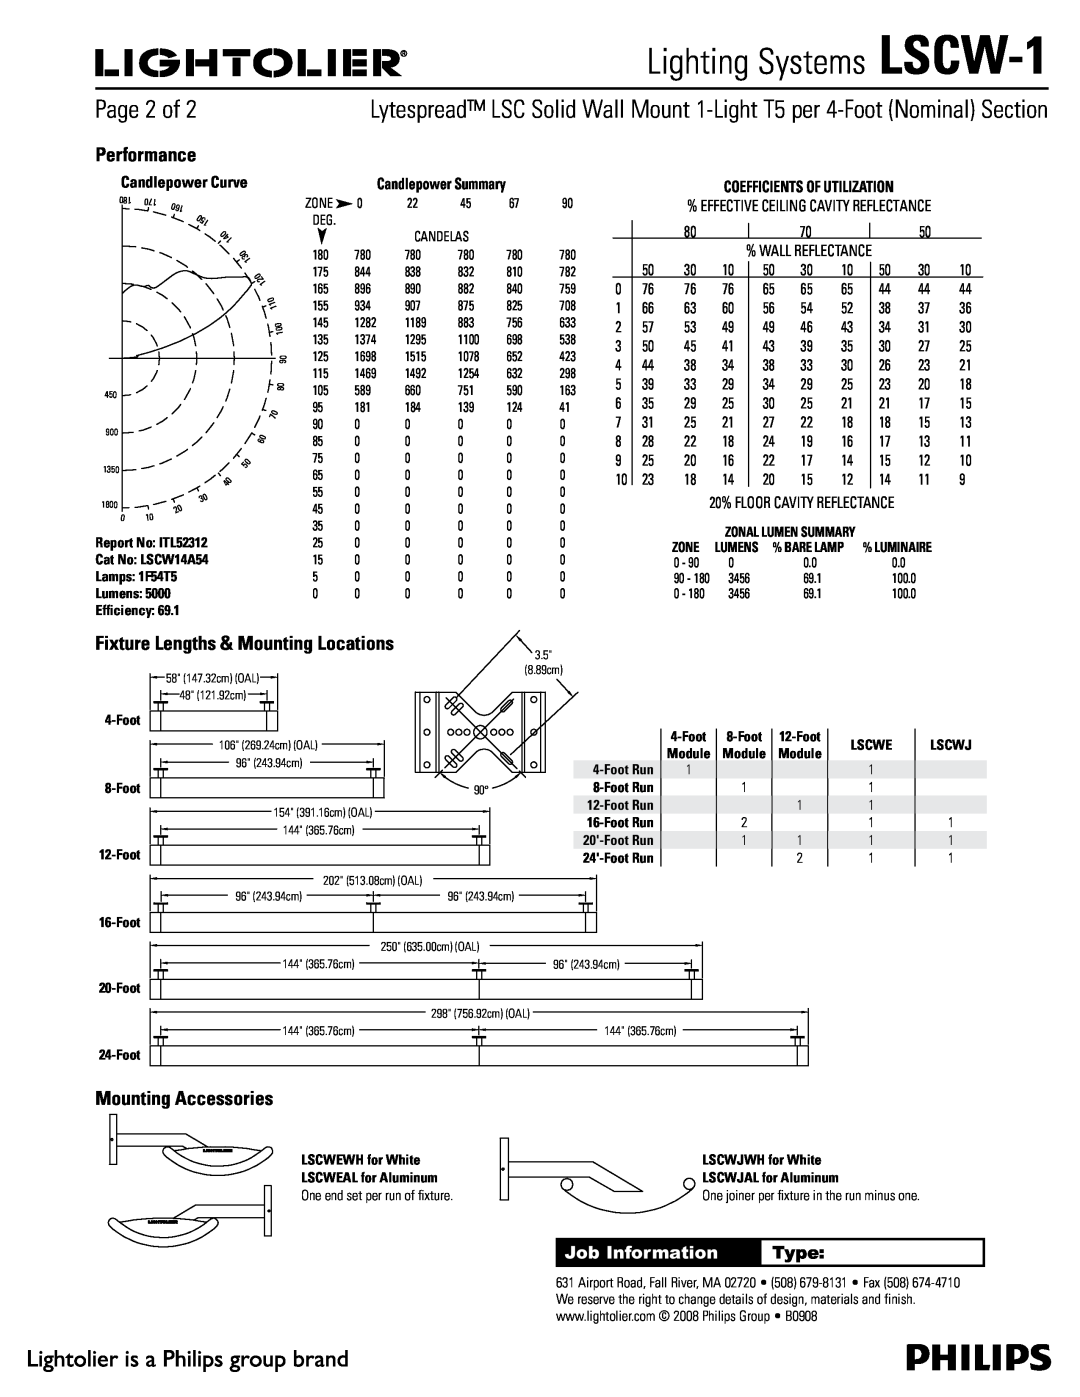 Lightolier manual Performance, Fixture Lengths & Mounting Locations, Mounting Accessories, Lighting Systems LSCW-1, Type 